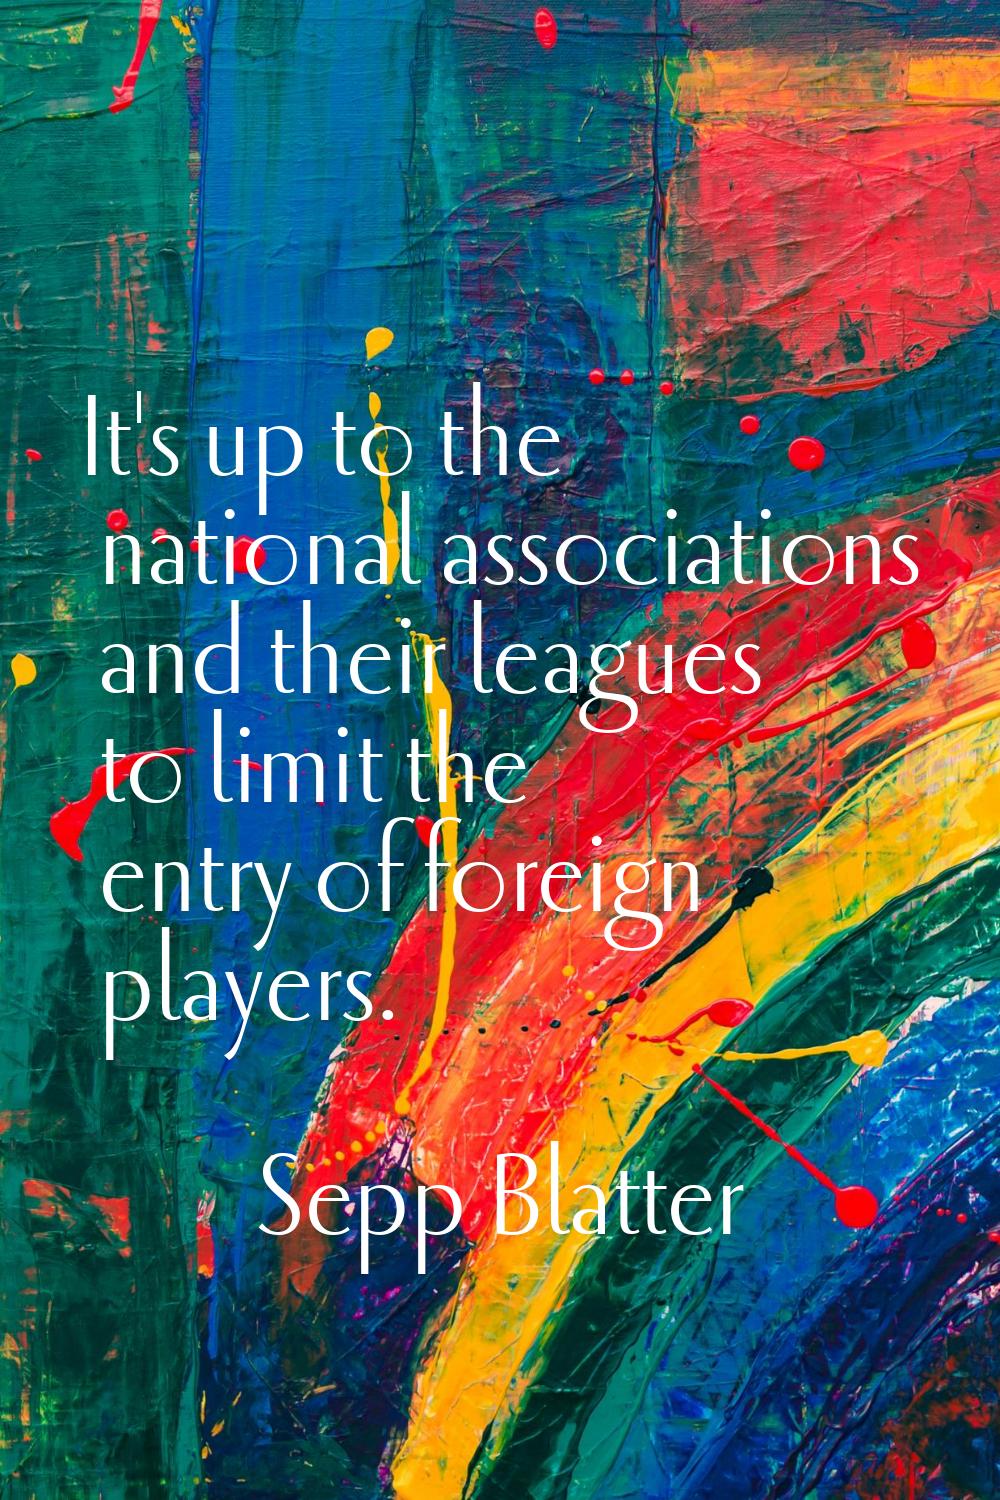 It's up to the national associations and their leagues to limit the entry of foreign players.